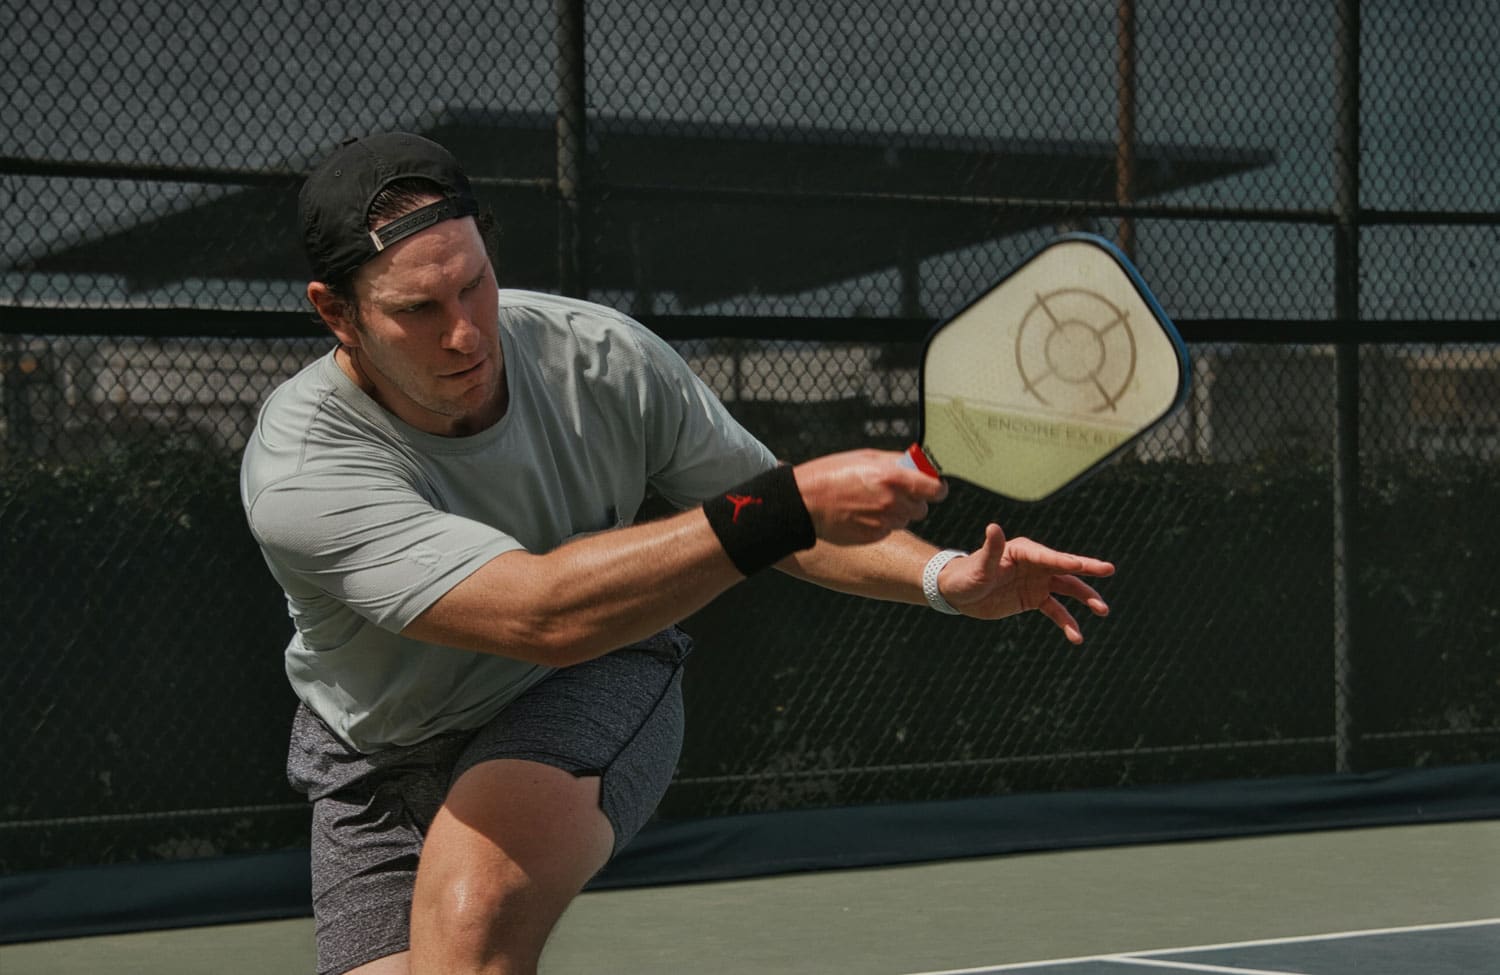 Pickleball vs Paddle Tennis vs Padel - What's the Difference?